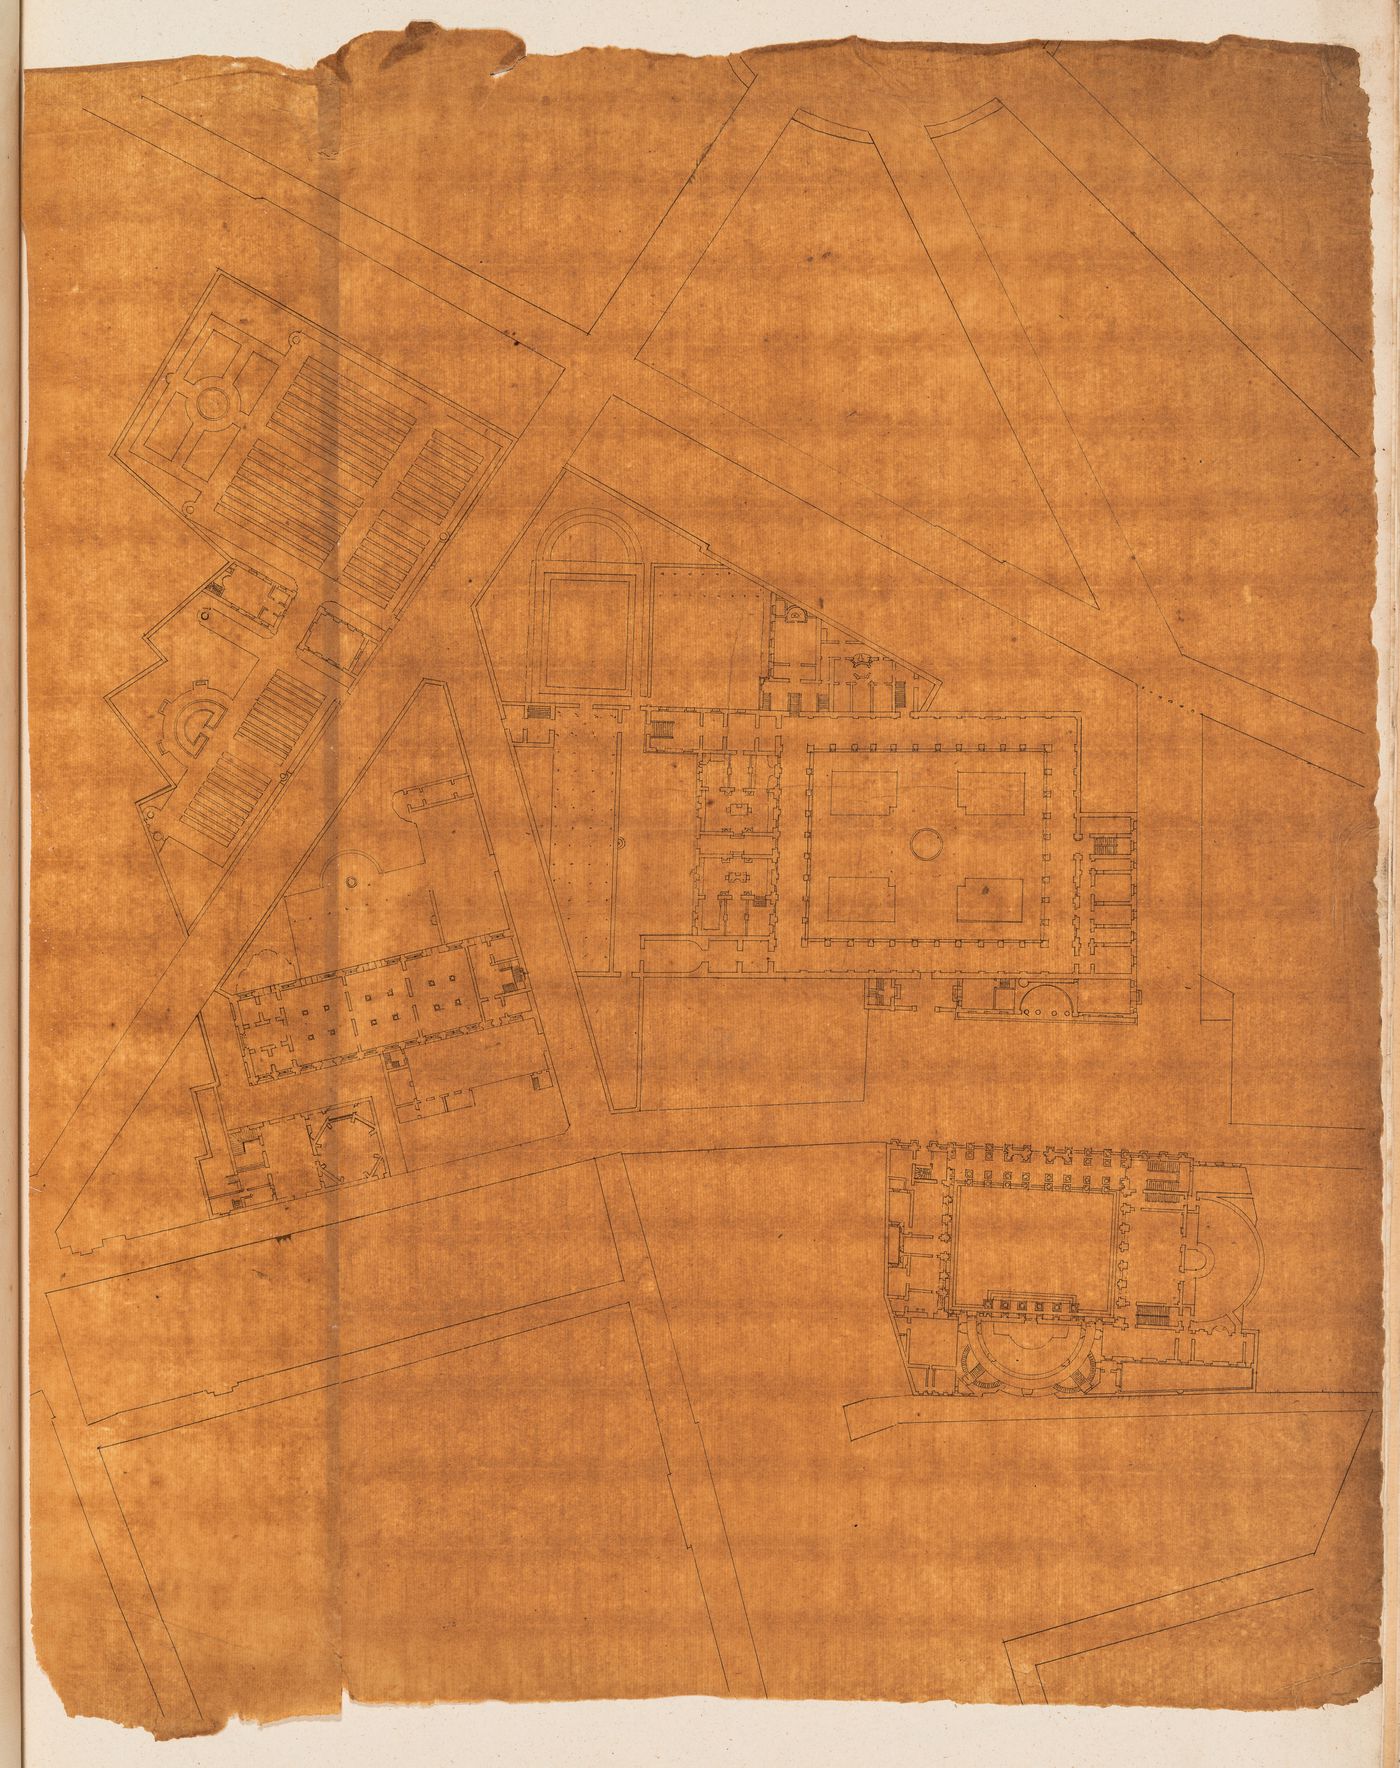 Project for the redevelopment of the École de médecine and surrounding area, Paris: Site plan showing additions and alterations to the buildings